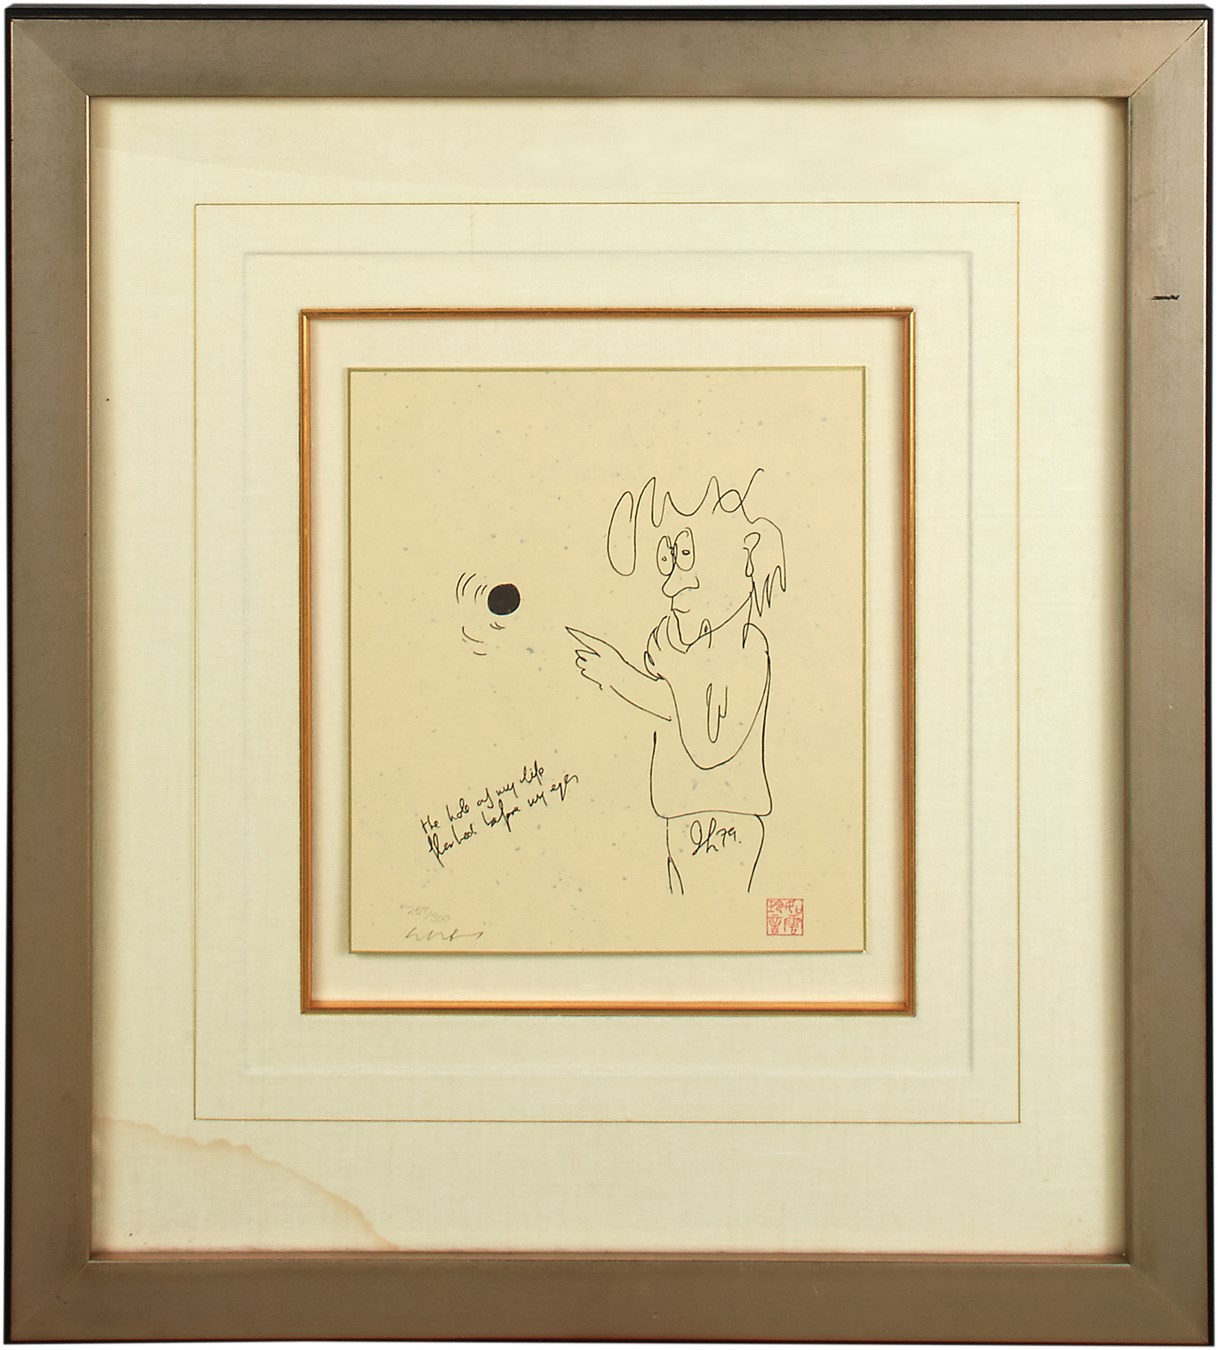 - "Hole of My Life" Limited Edition Print by John Lennon